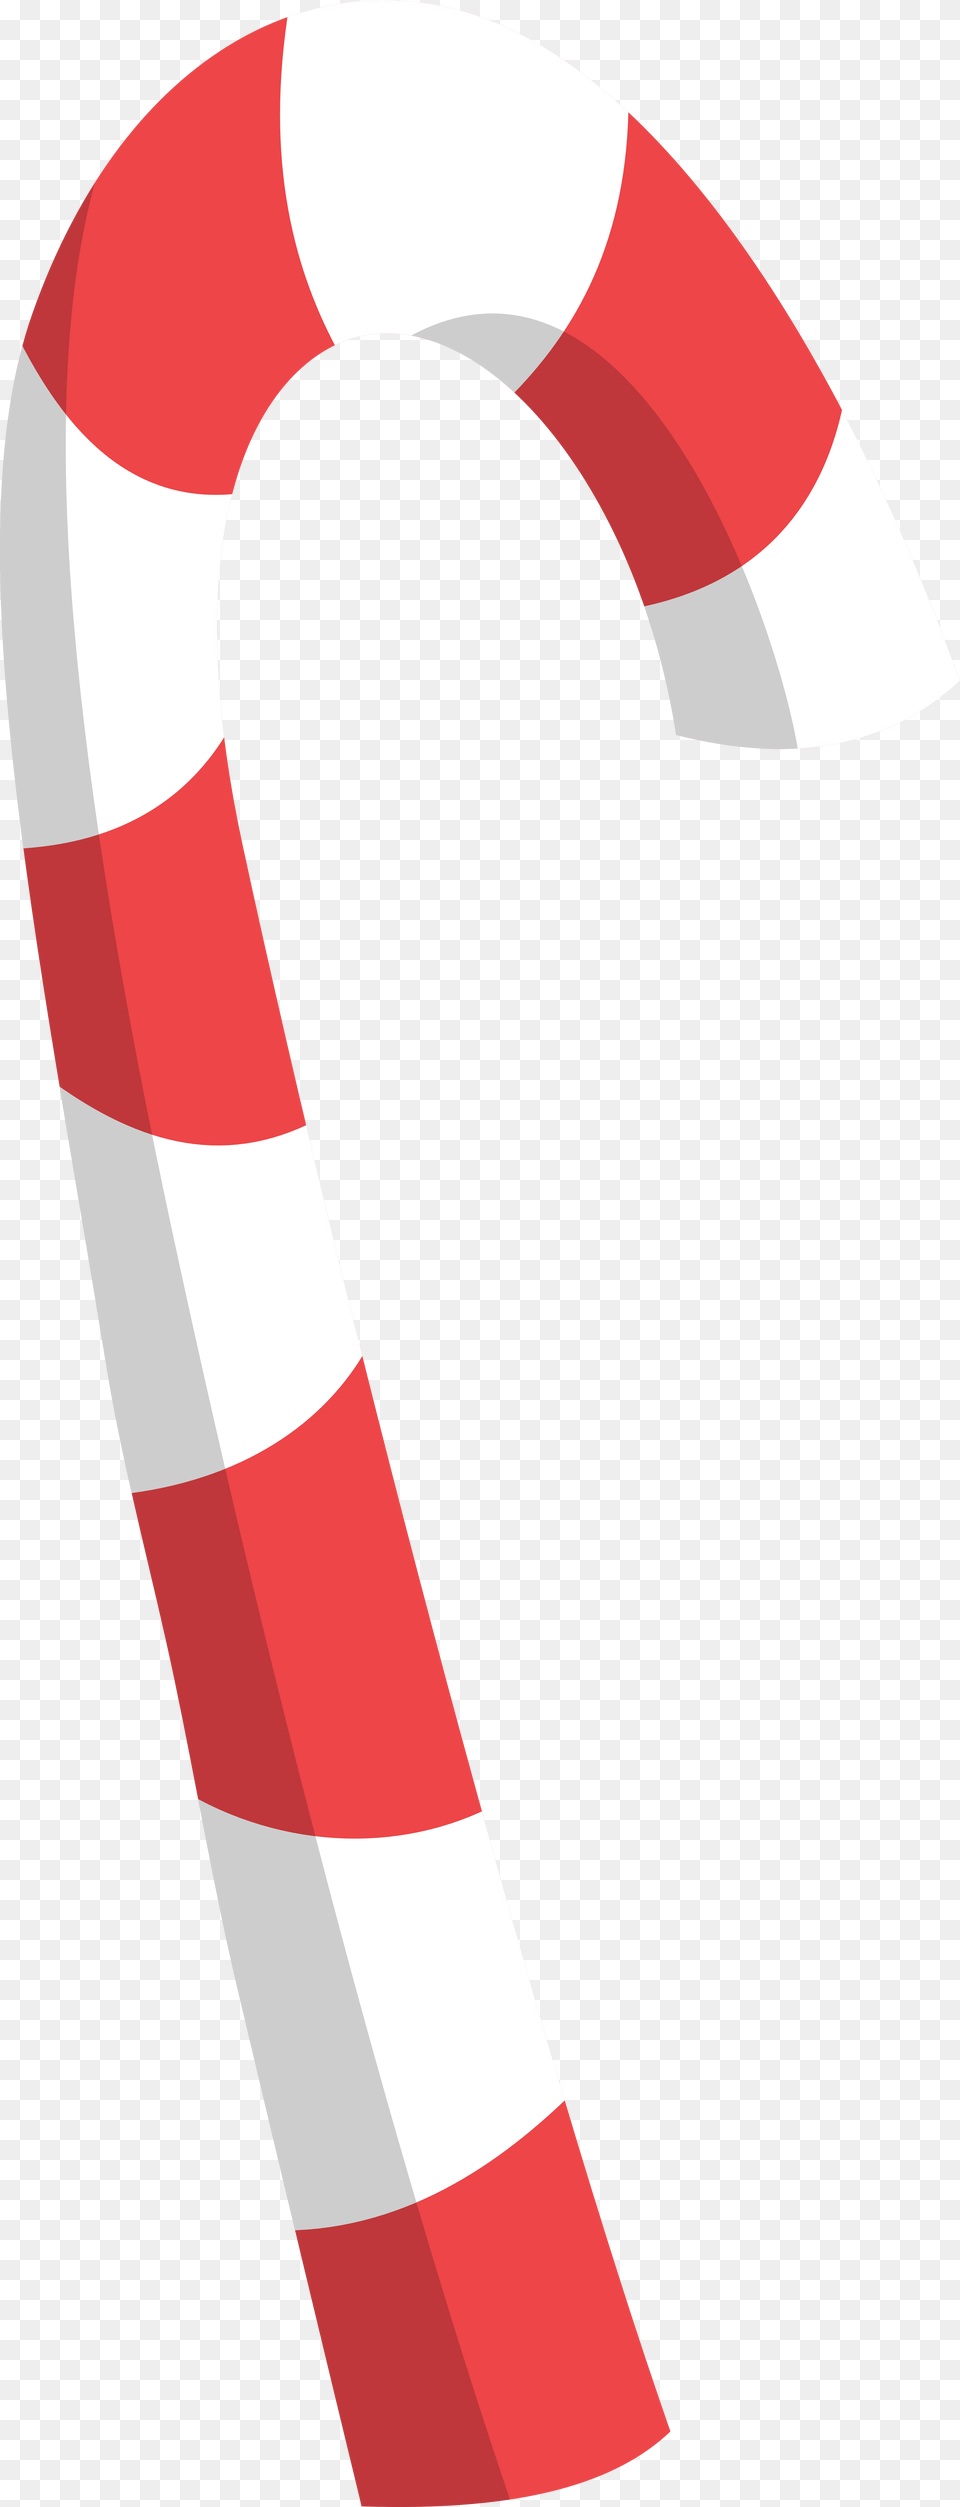 Mouse With Candy Cane Images Transparent Image Of Candy Cane, Food, Sweets, Dynamite, Weapon Png